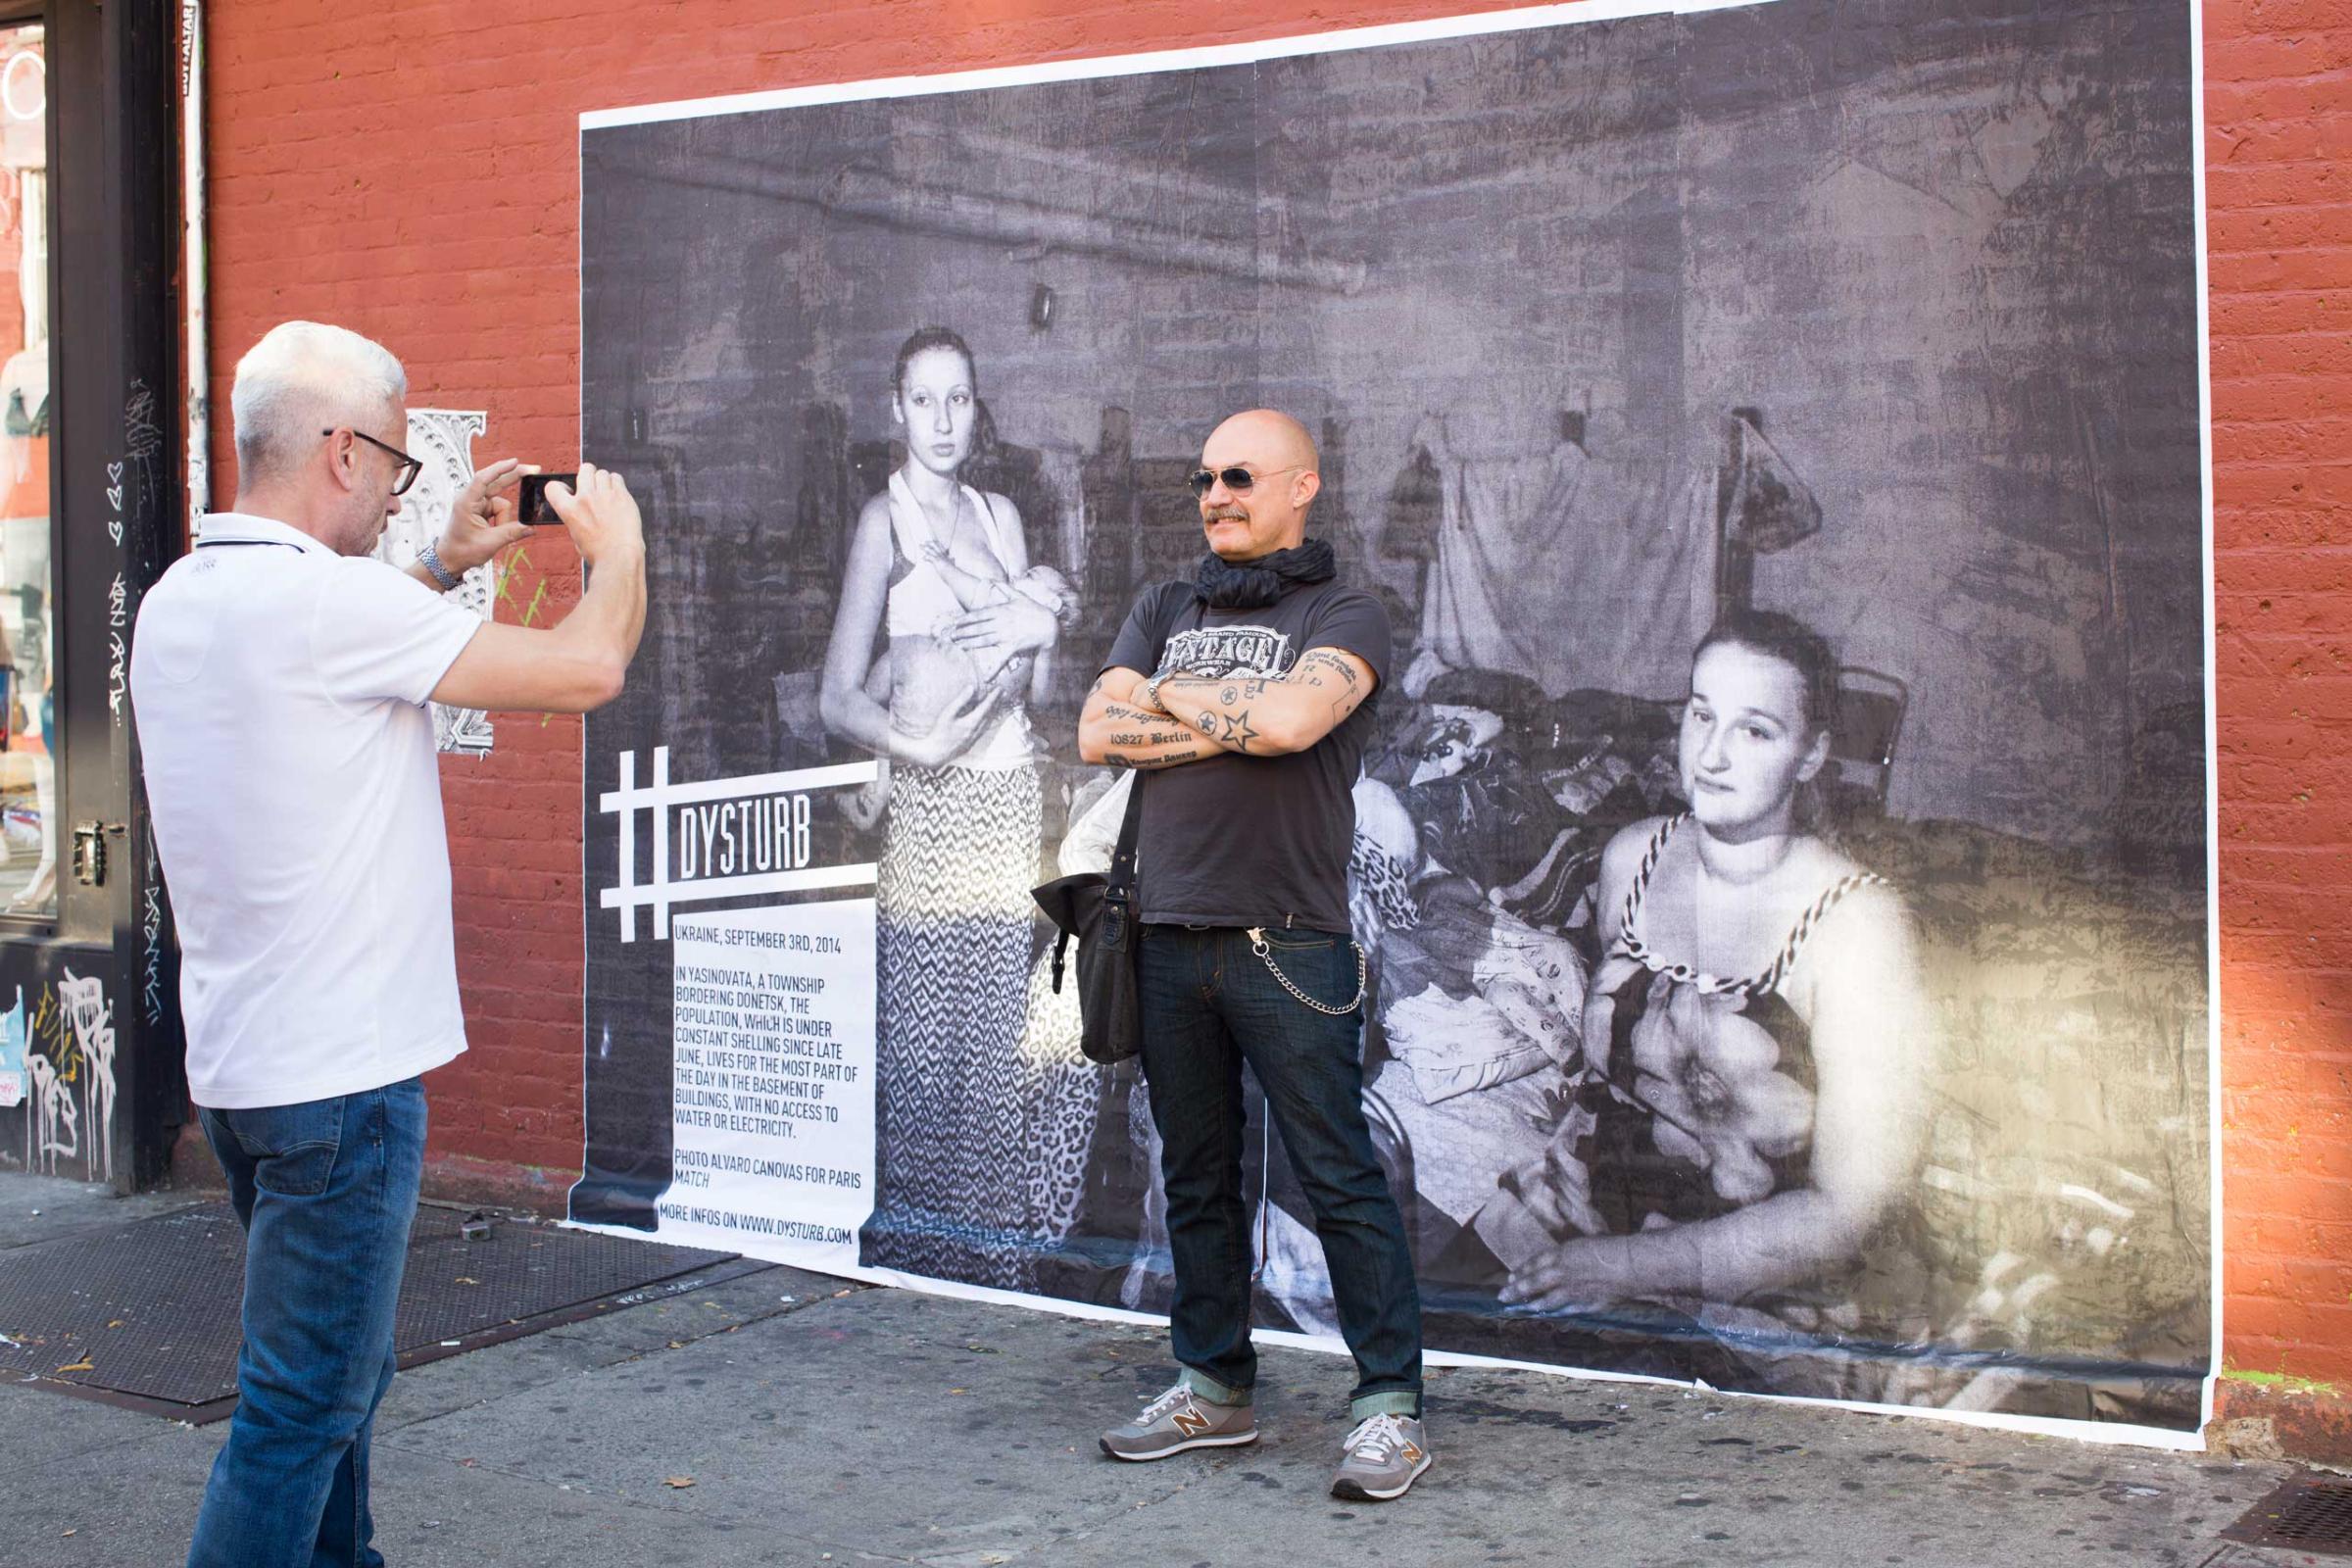 A New Yorker in front of one of Dysturb's photographs (in Brooklyn, on the corner of N 6th Street and Bedford Avenue). October 17th 2014.